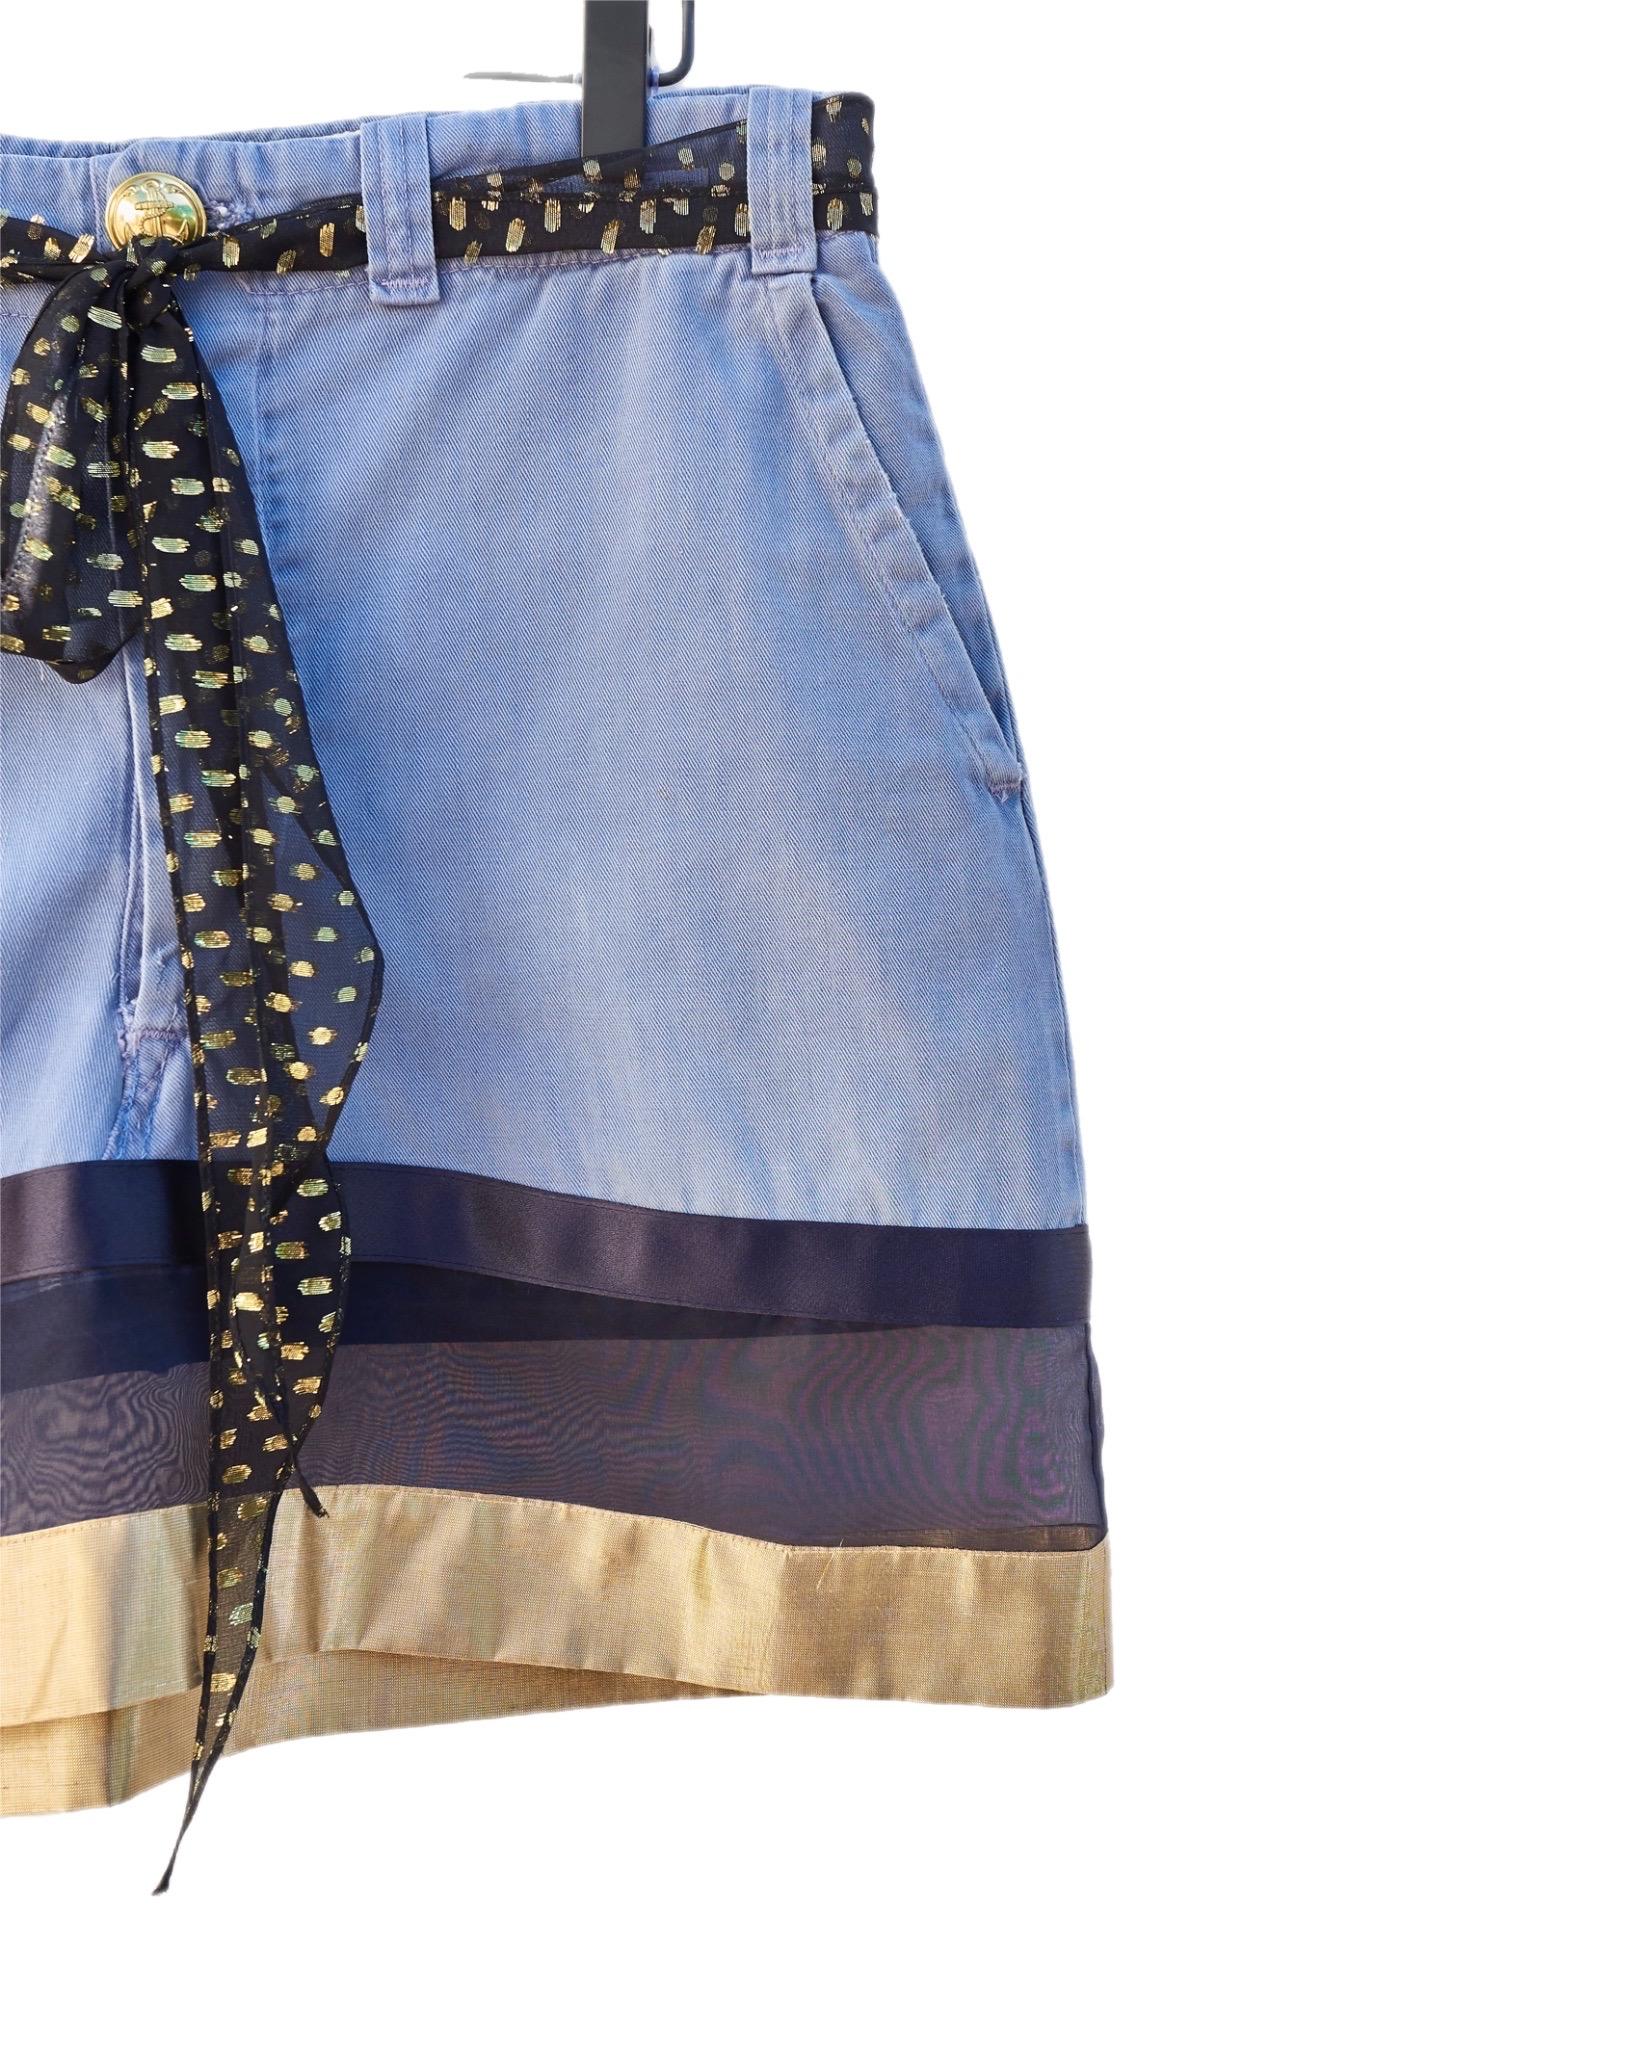 Designer J Dauphin 
Designer Mini Skirt Vintage Work Wear Blue Cotton Organza Transparent Stripe Gold with Silk Chiffon Black Gold Lurex Belt

This Skirt is made out of Repurposed Vintage Work Wear and Military Gold Tone Brass buttons Made in Paris